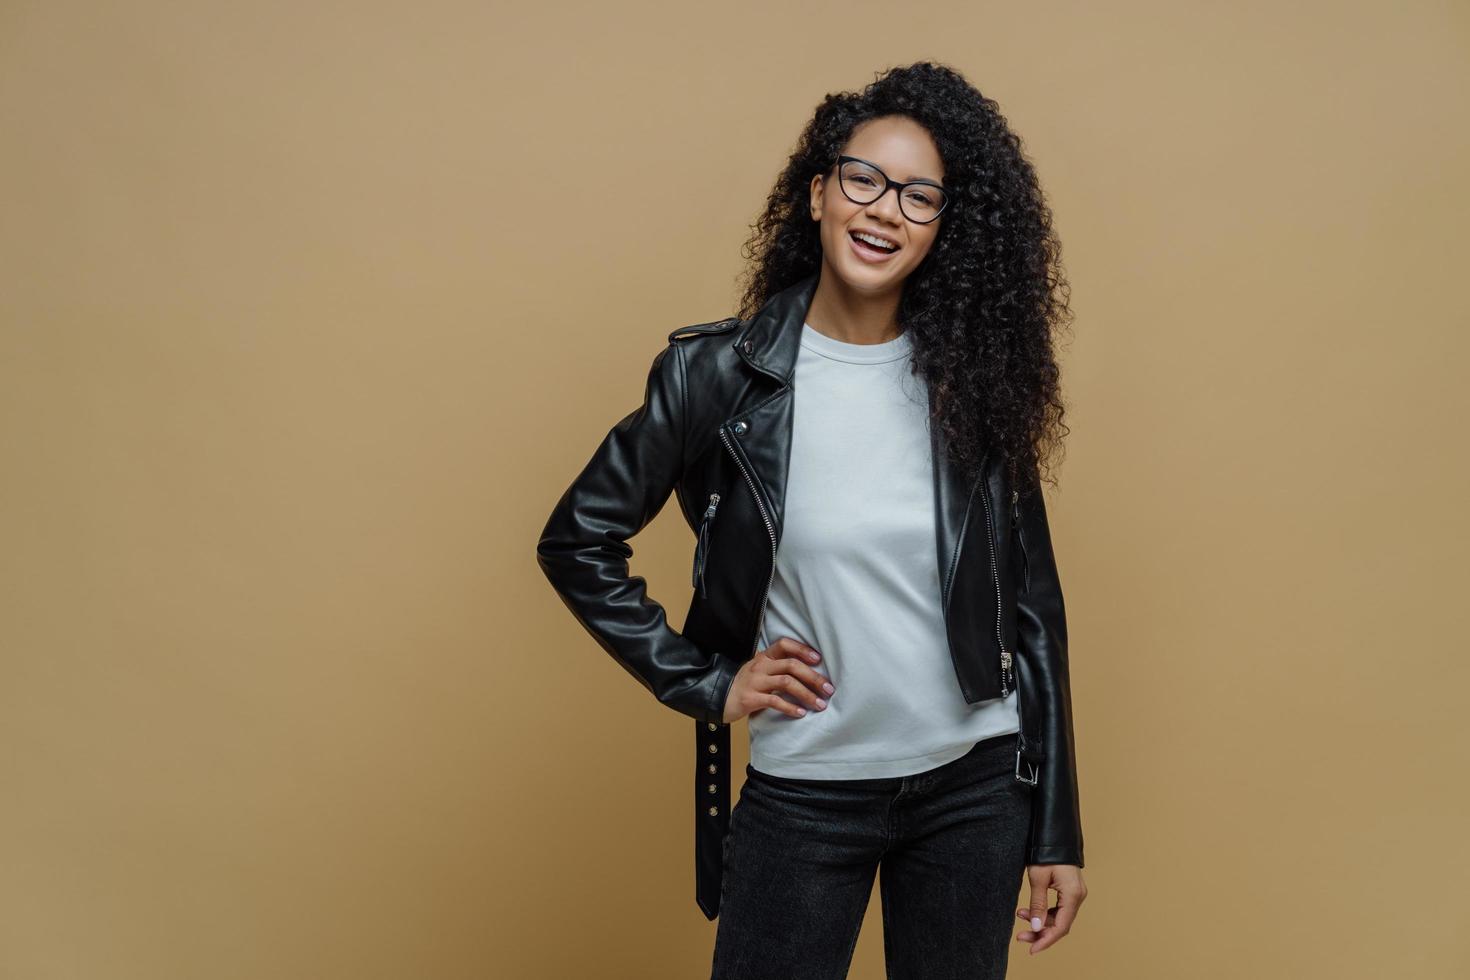 Fashionable woman with glad expression, keeps hand on hip, smiles cheerfully, wears optical glasses, white t shirt, black leather jacket and jeans, ready for walk, poses against beige background photo